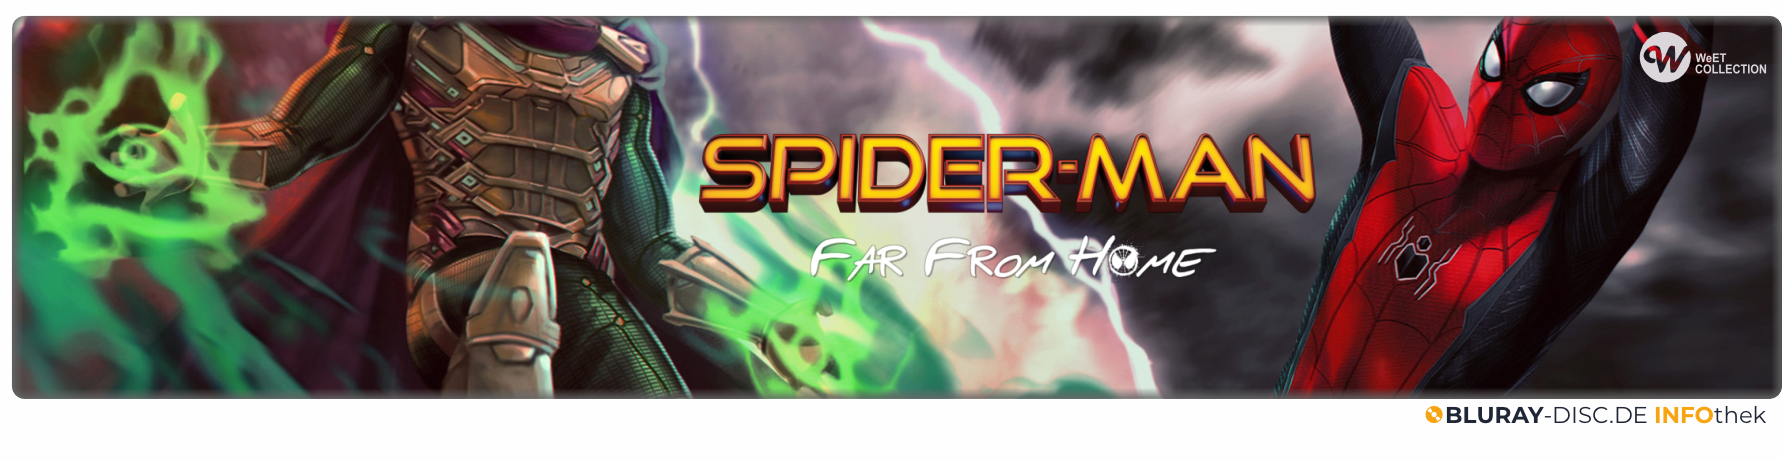 Moviebanner_WeET_Spiderman_Far_From_Home.png